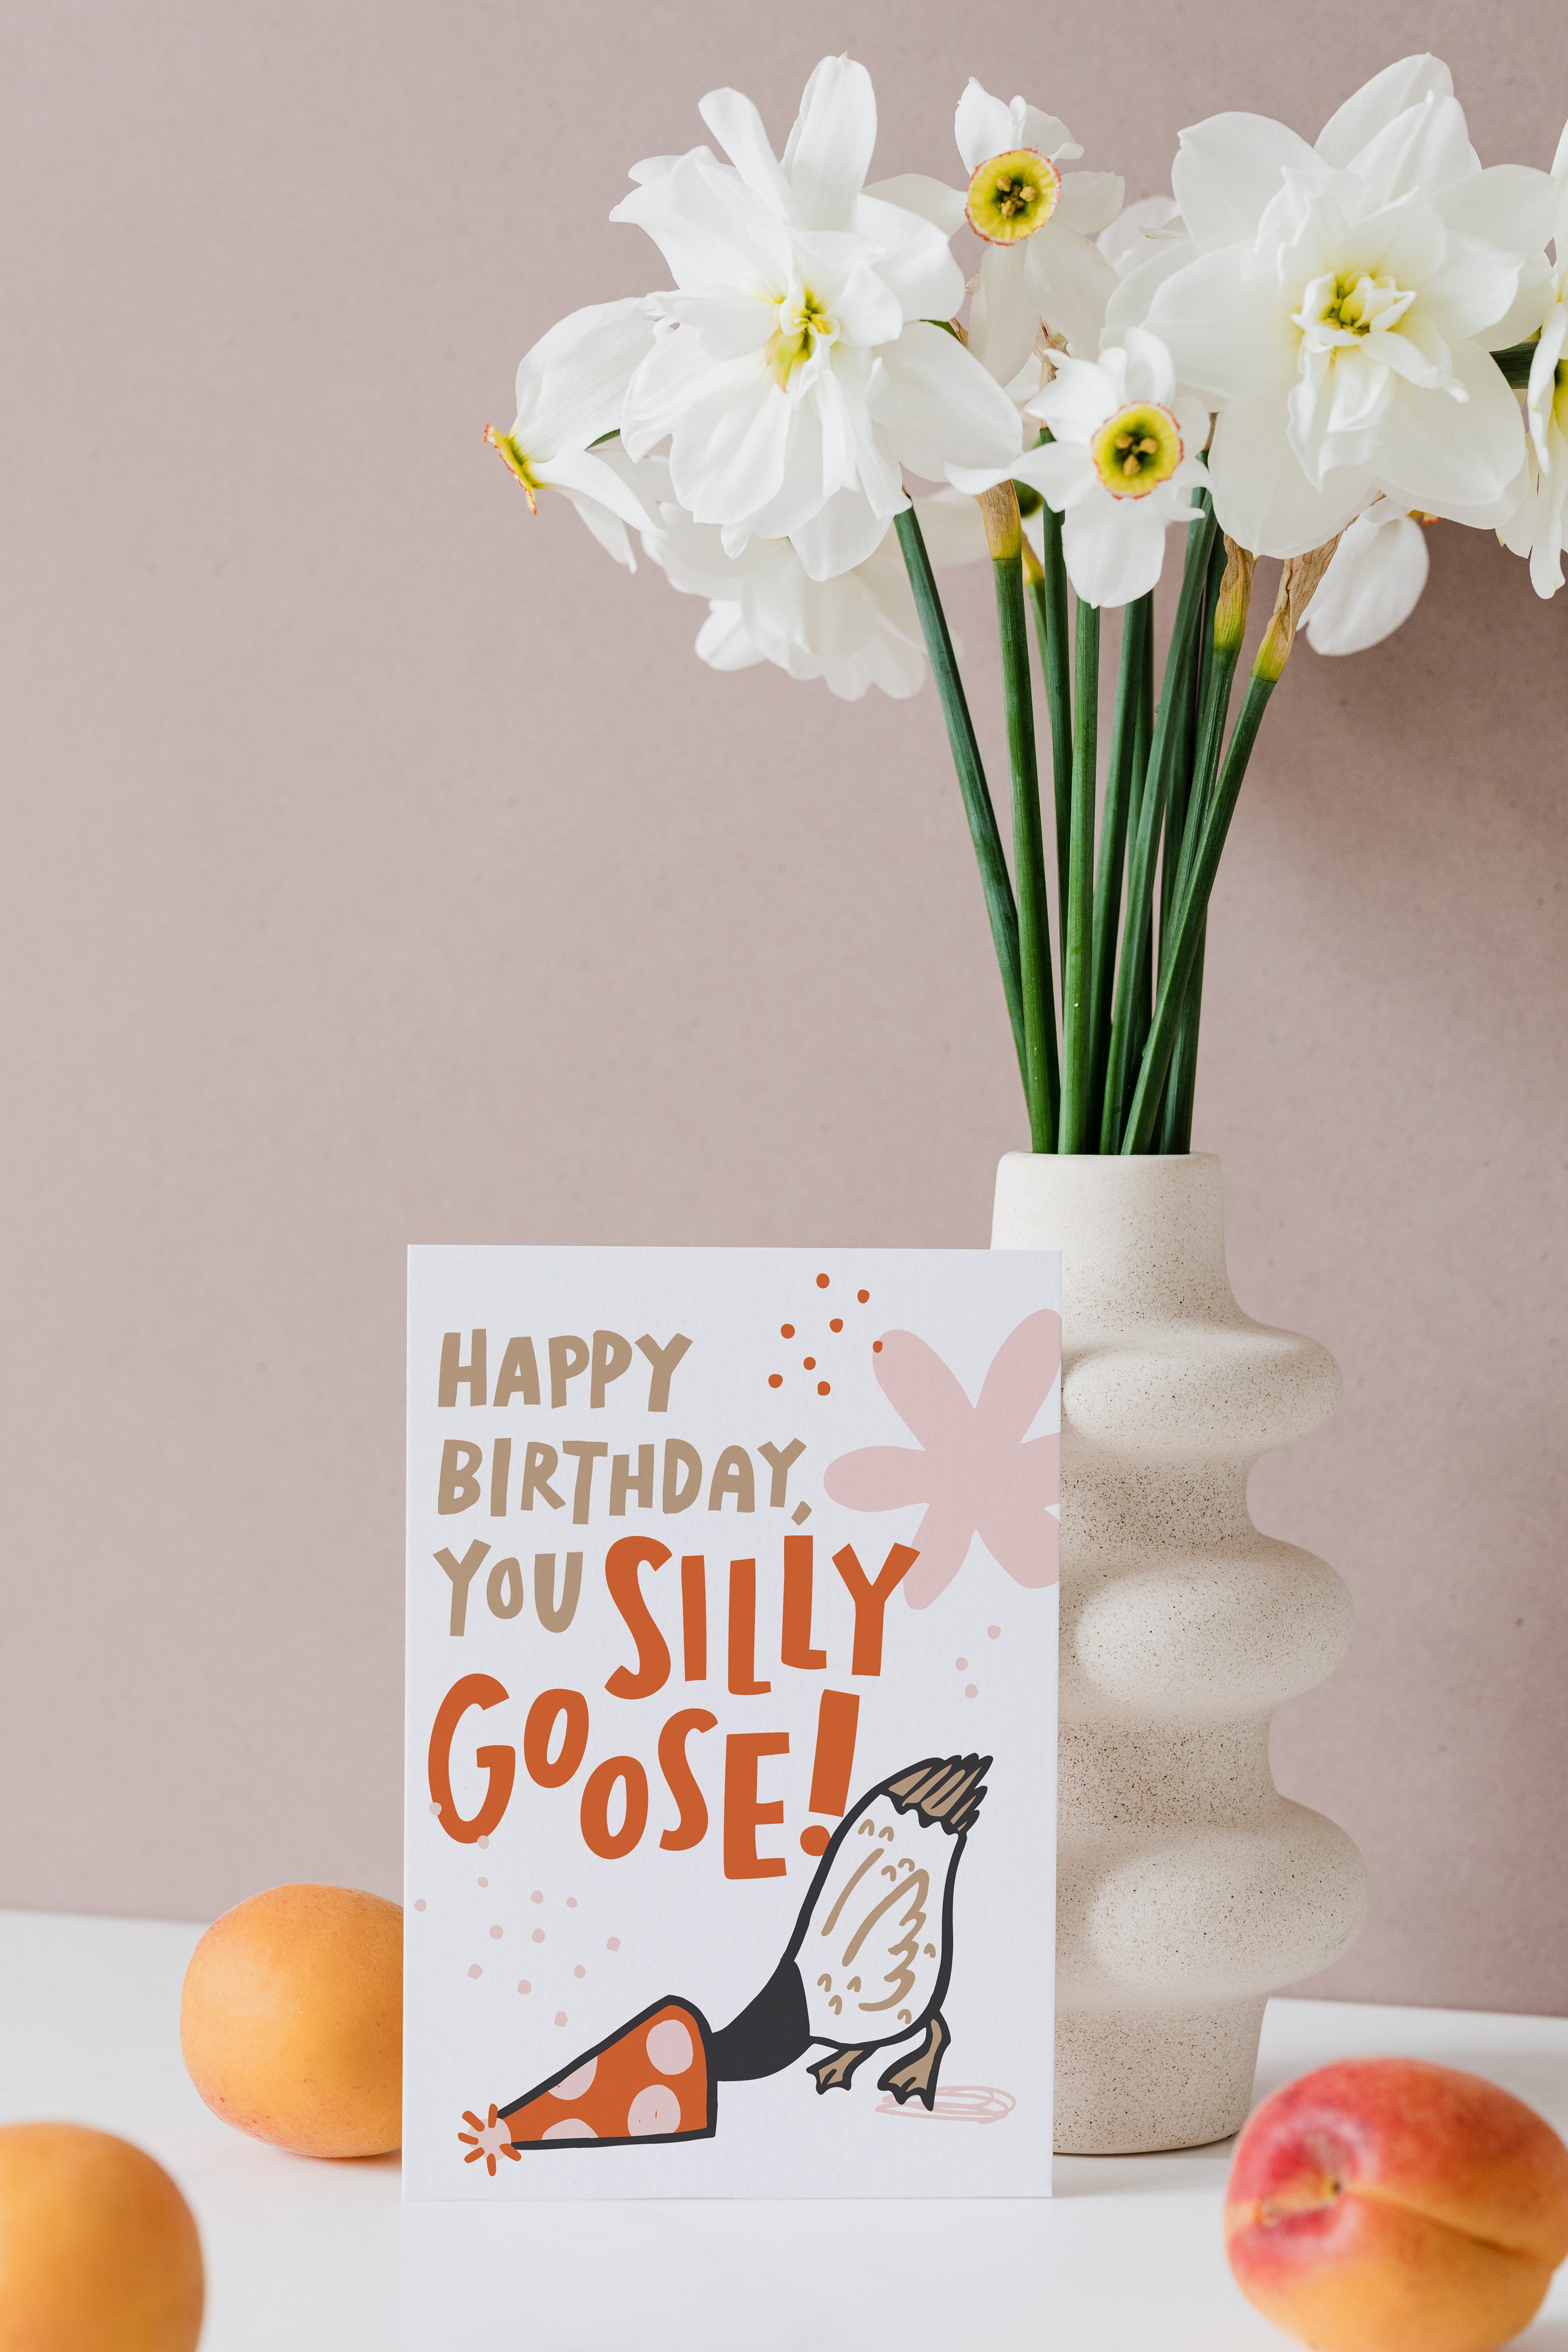 Silly Goose Birthday card by Hello Doodle